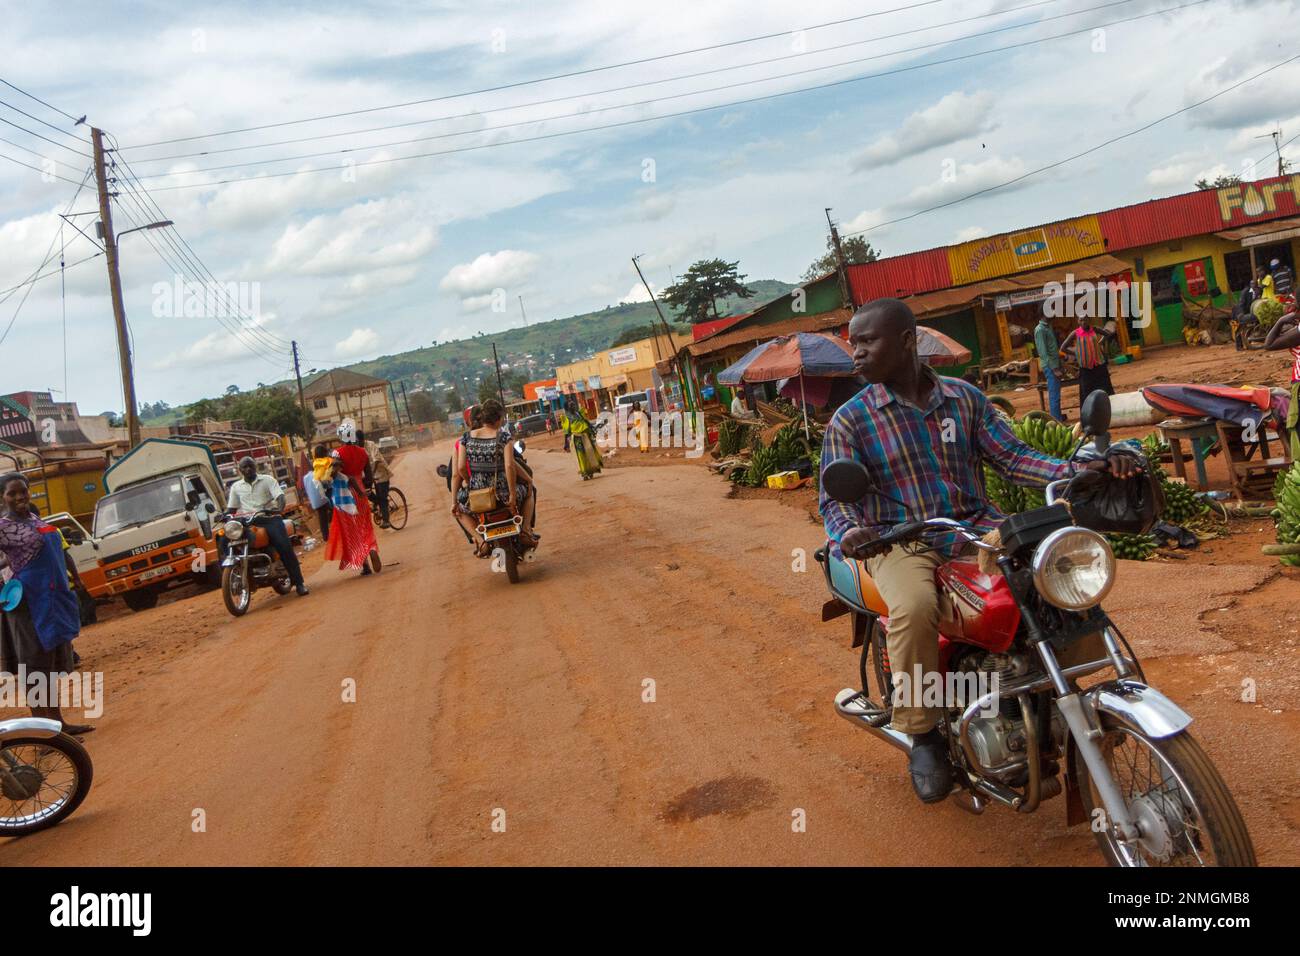 A ride on a motorbike through a marketplace in the town of Lugazi in Uganda. Stock Photo